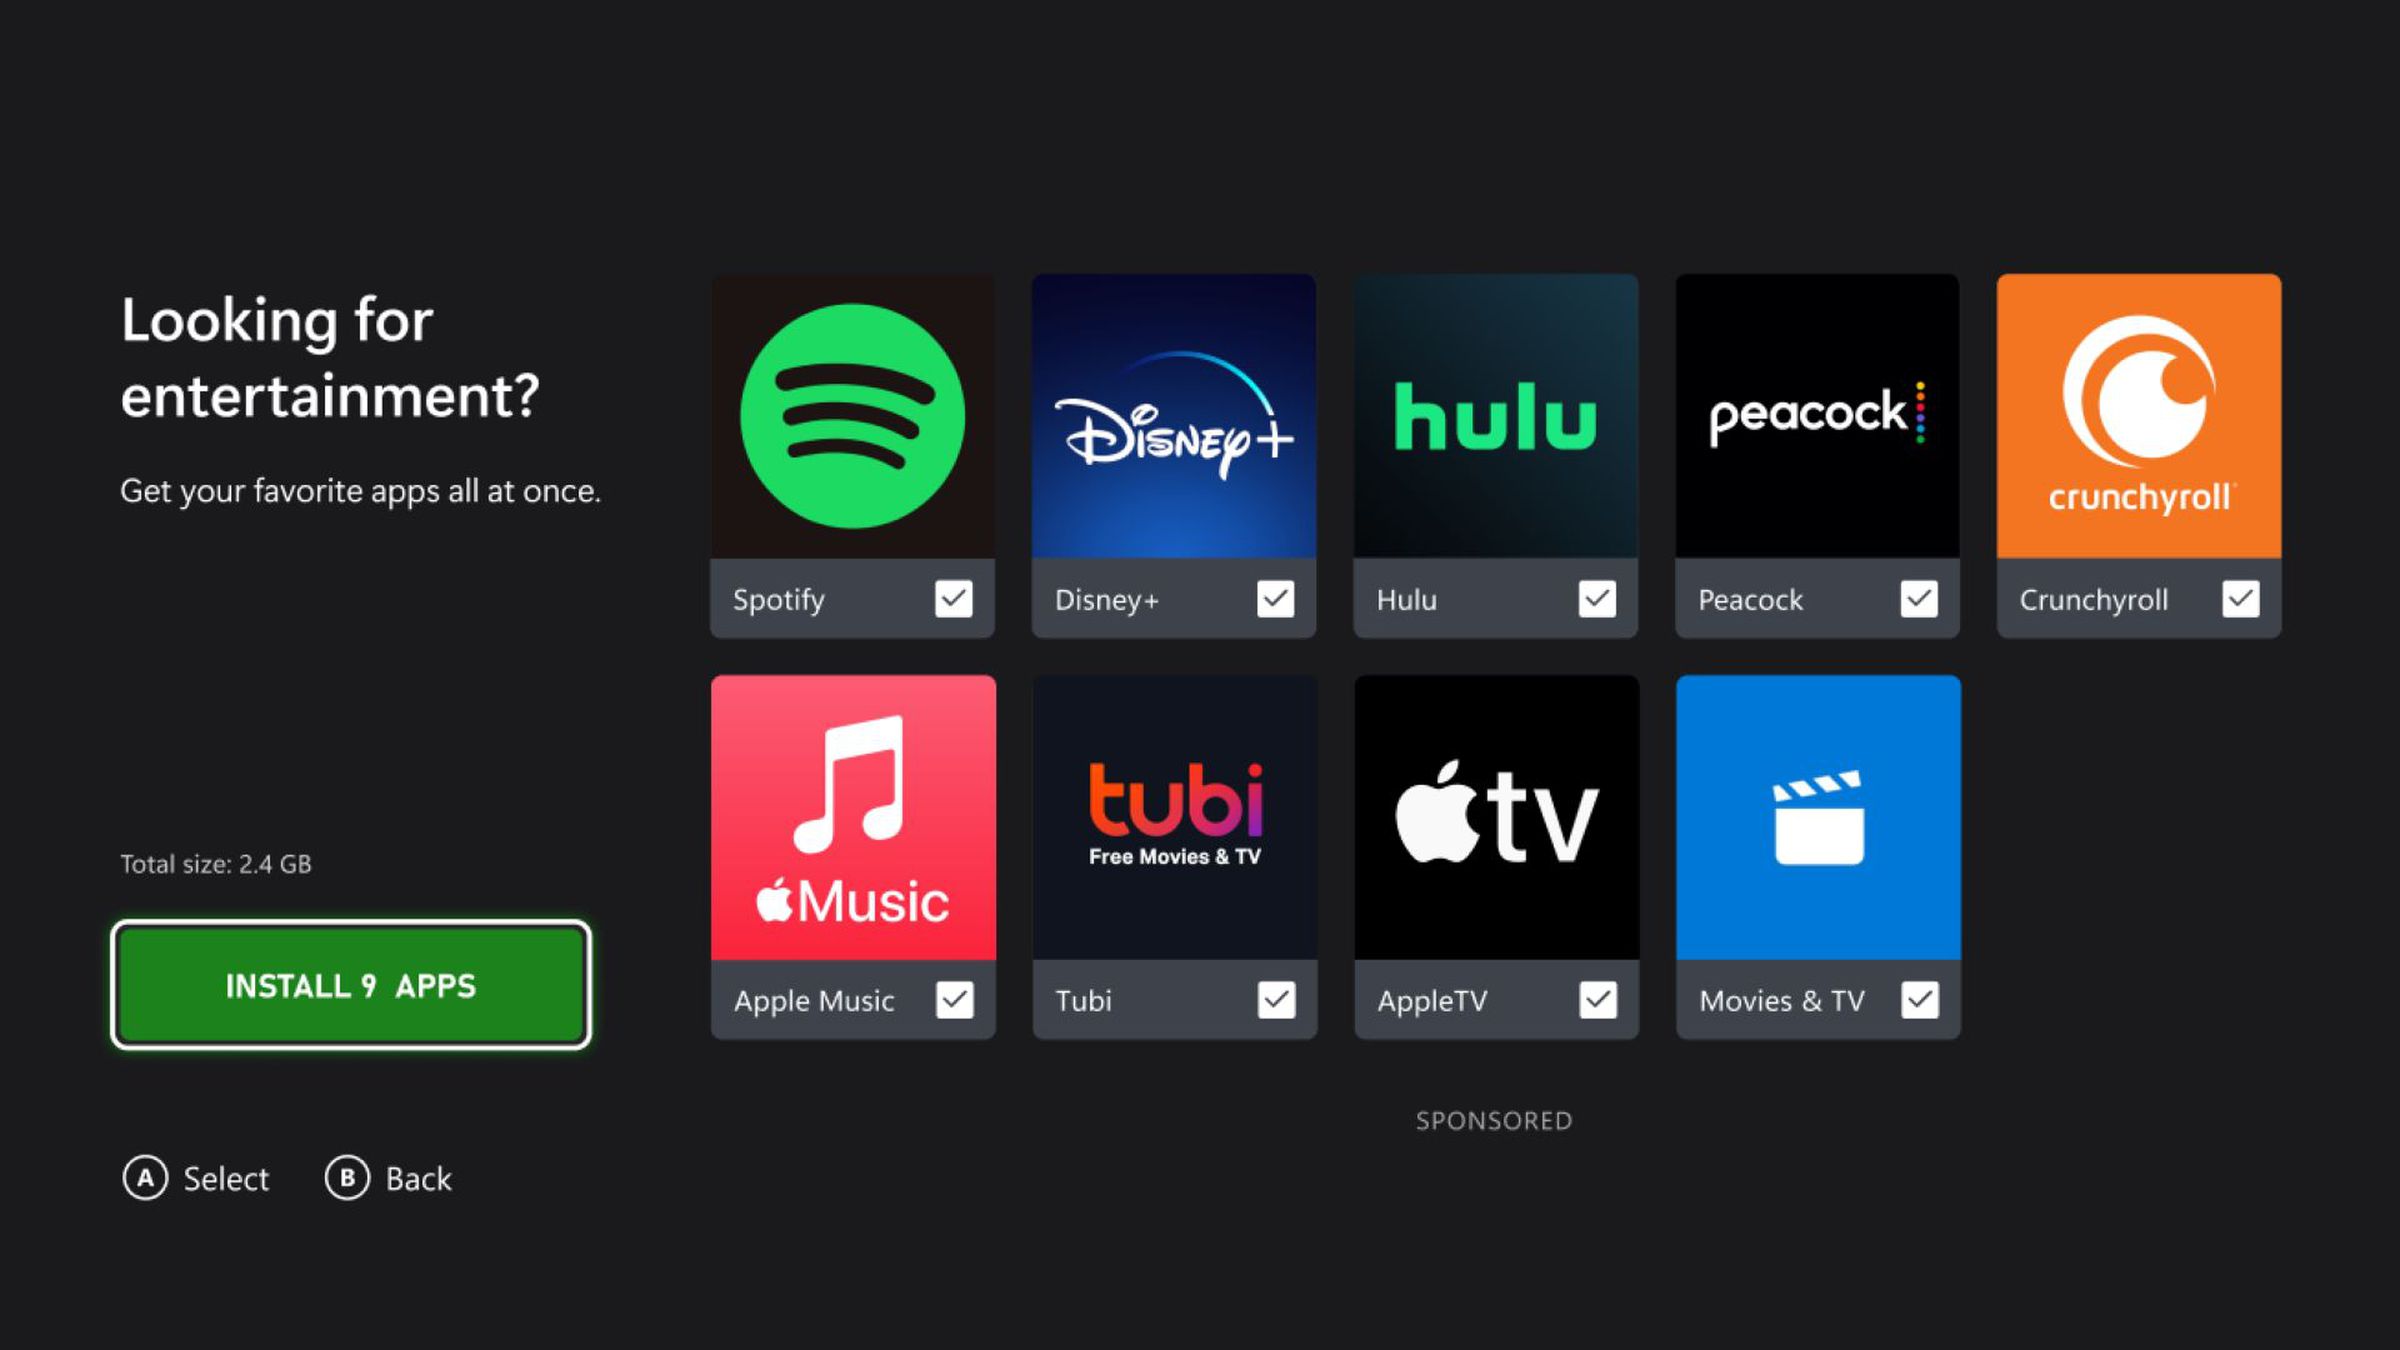 Screenshot from an Xbox console showing the apps that the console will prompt you to download during a new console set up. The apps featured are Spotify, Disney+, Hulu, Peacock, Crunchyroll, Apple Music, Apple TV, and the Xbox Movies &amp; TV app.